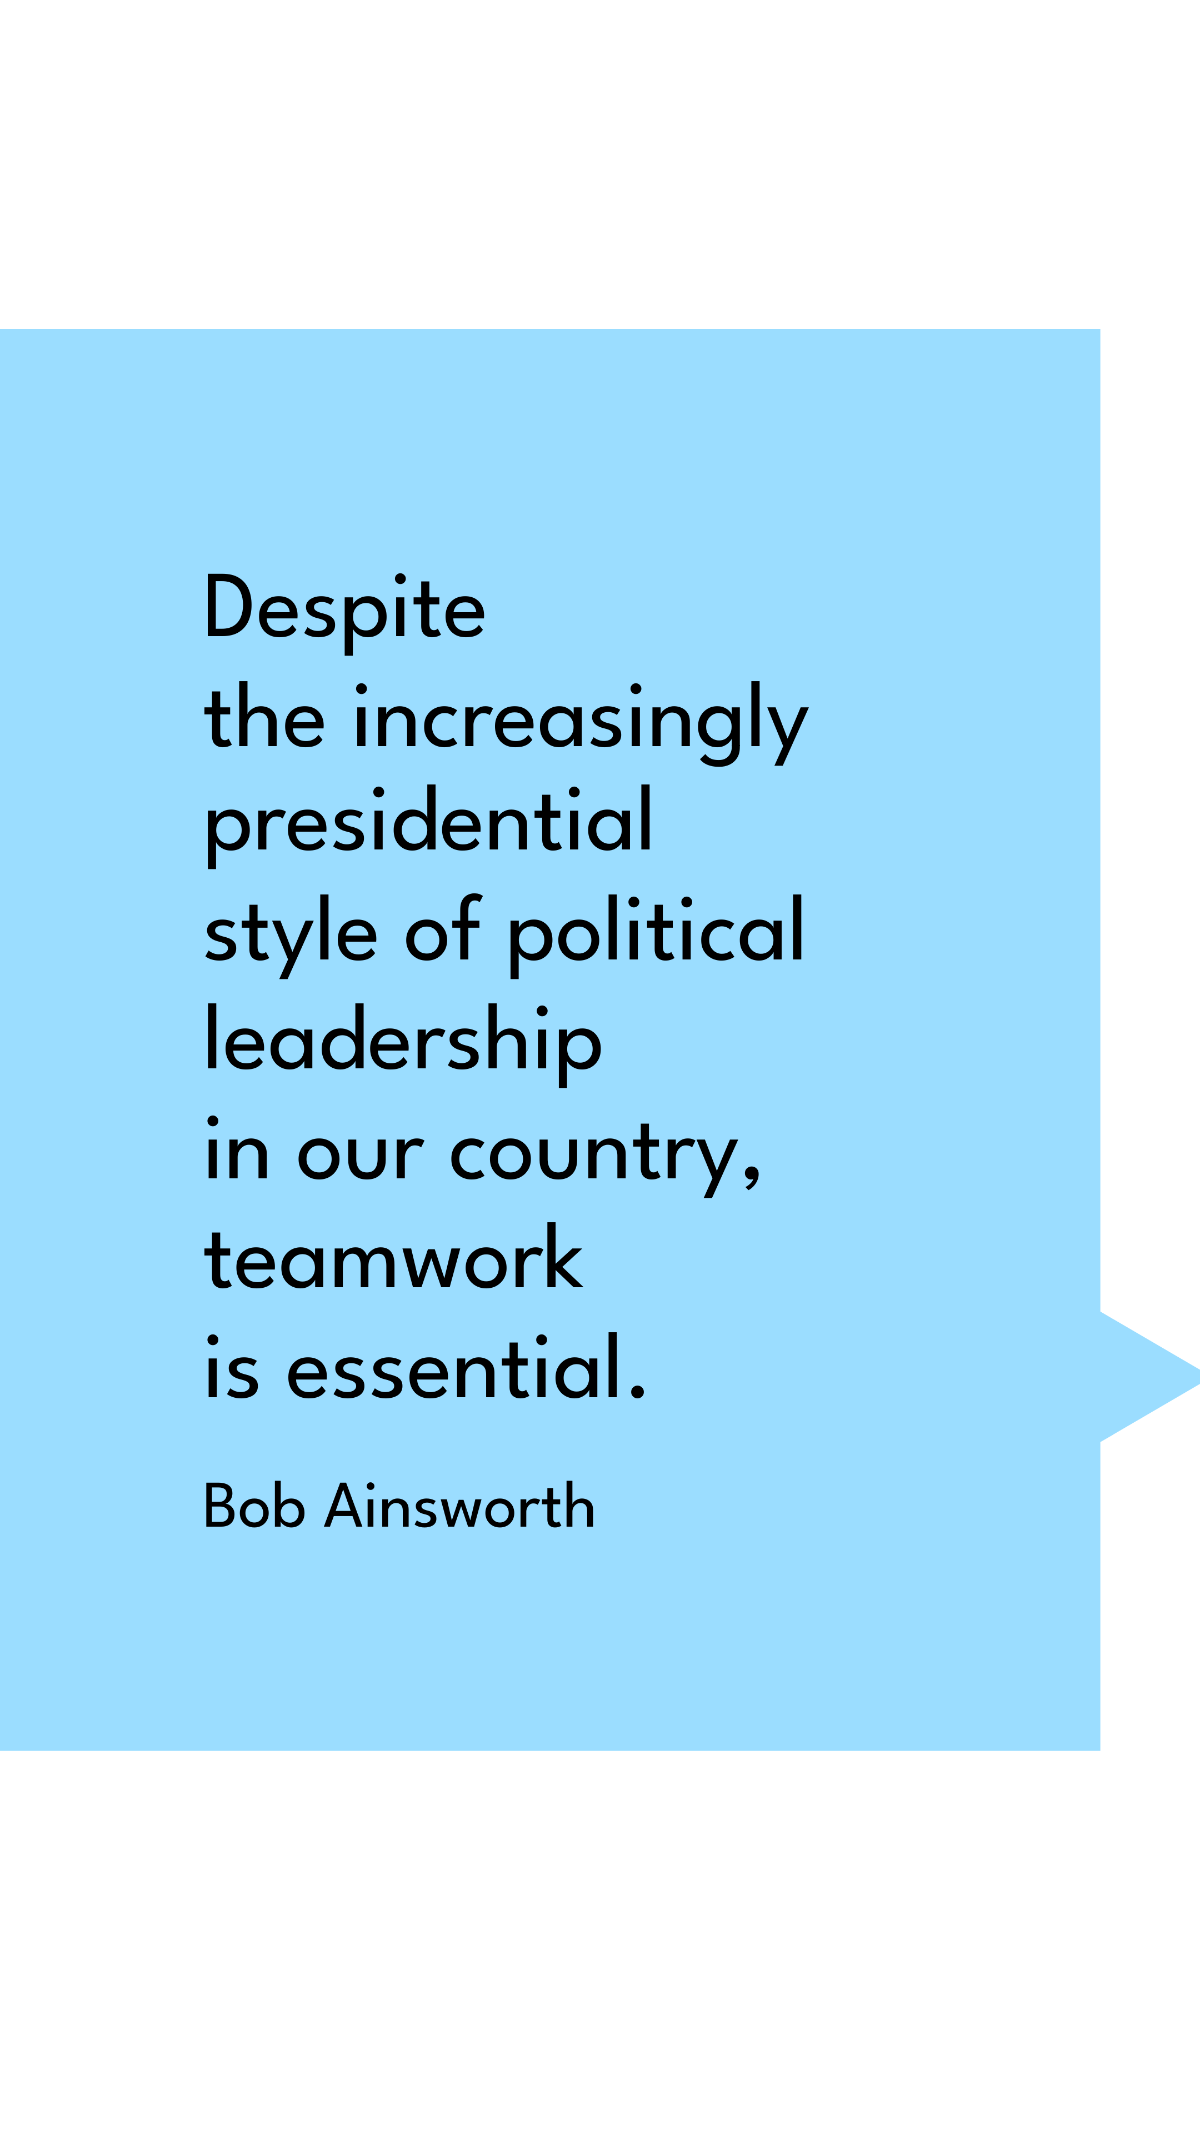 Bob Ainsworth - Despite the increasingly presidential style of political leadership in our country, teamwork is essential.